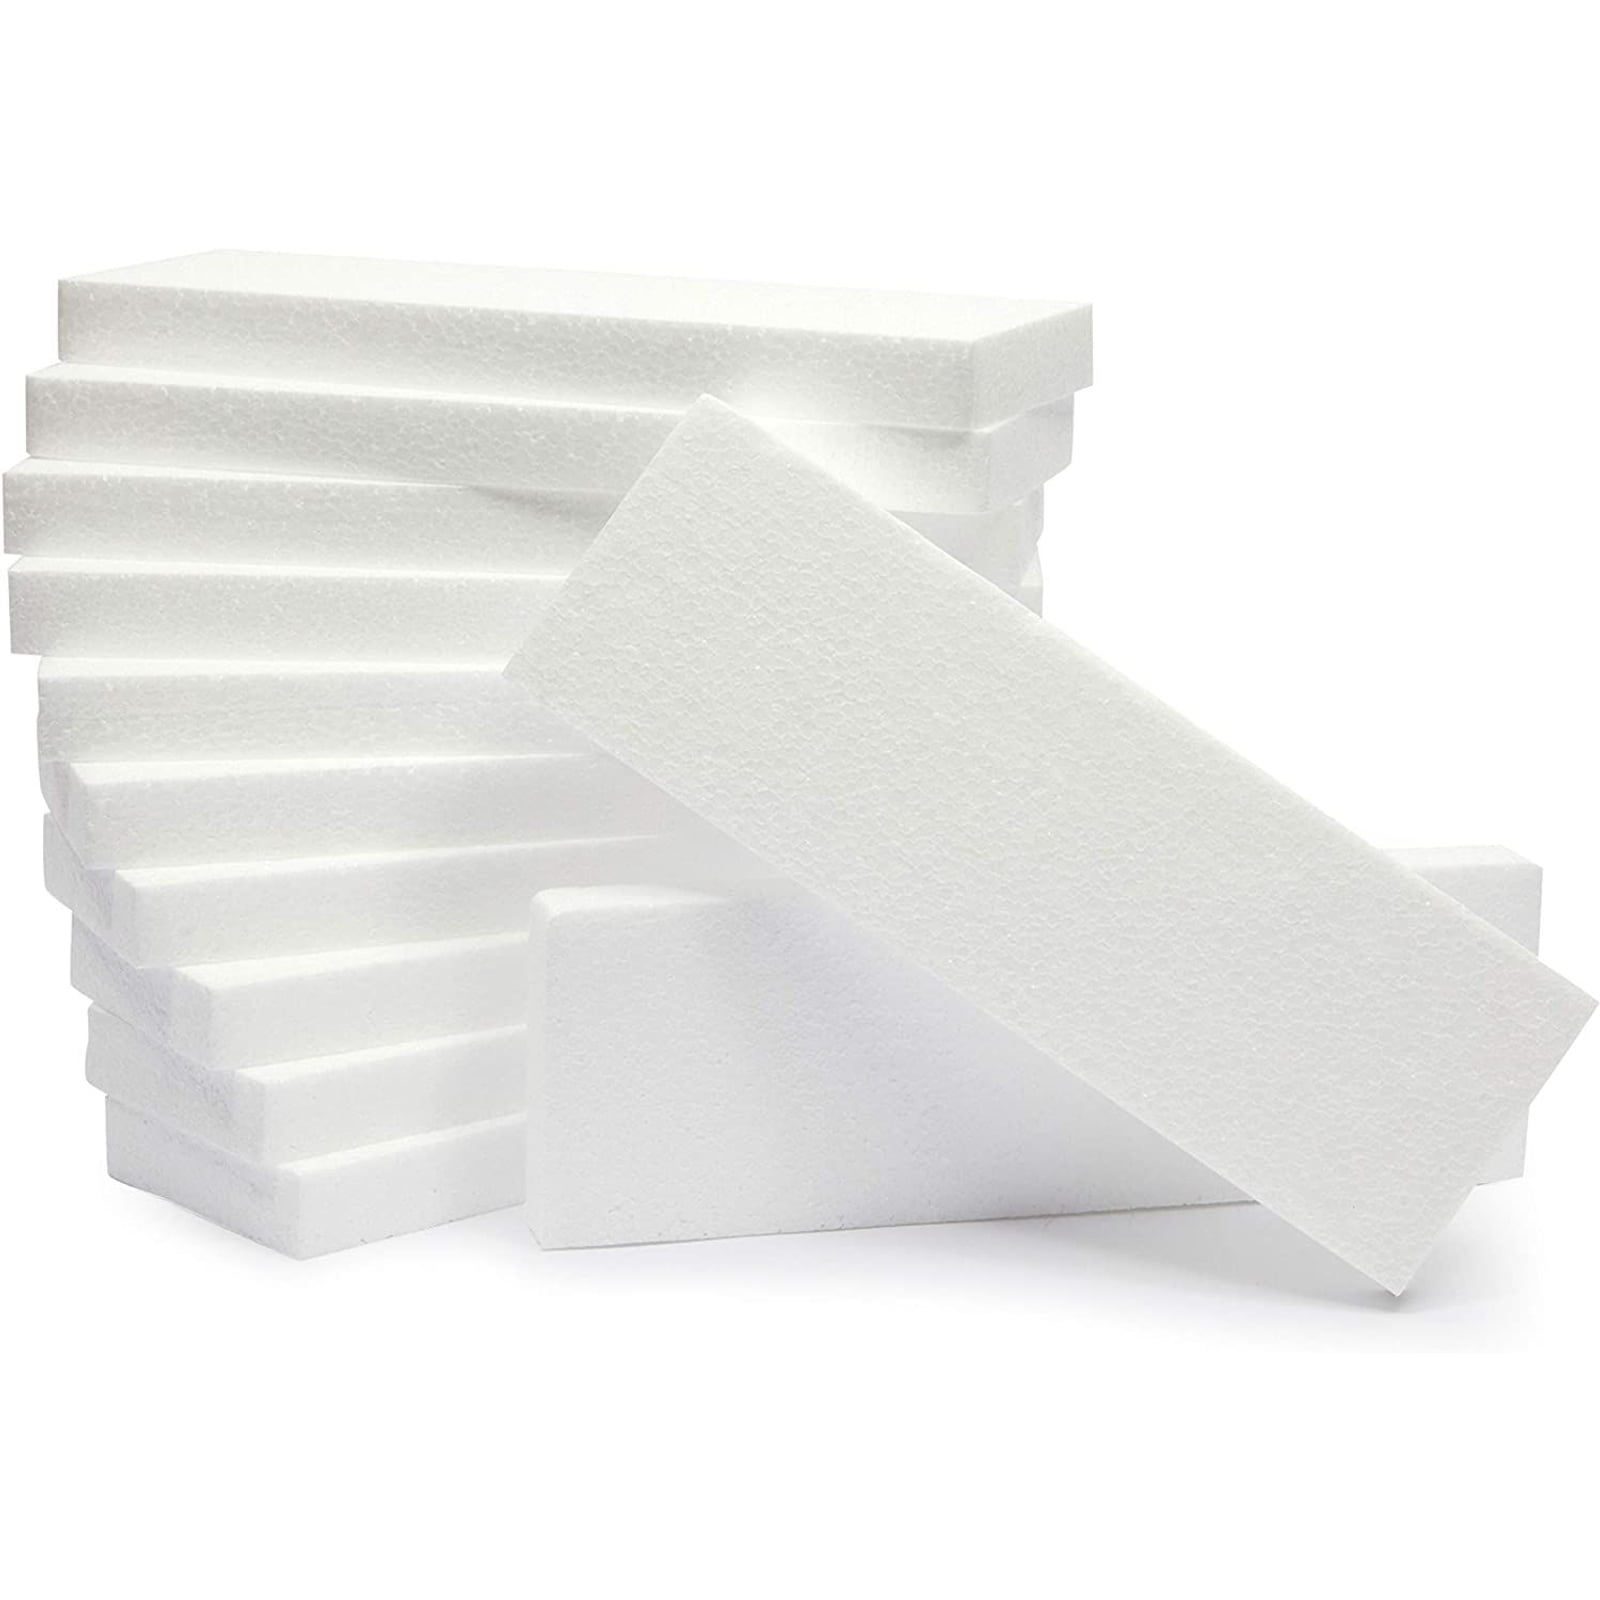 White Foam DISPOSABLE PLATES Small Medium Large Polystyrene Party Food BBQ Kids 